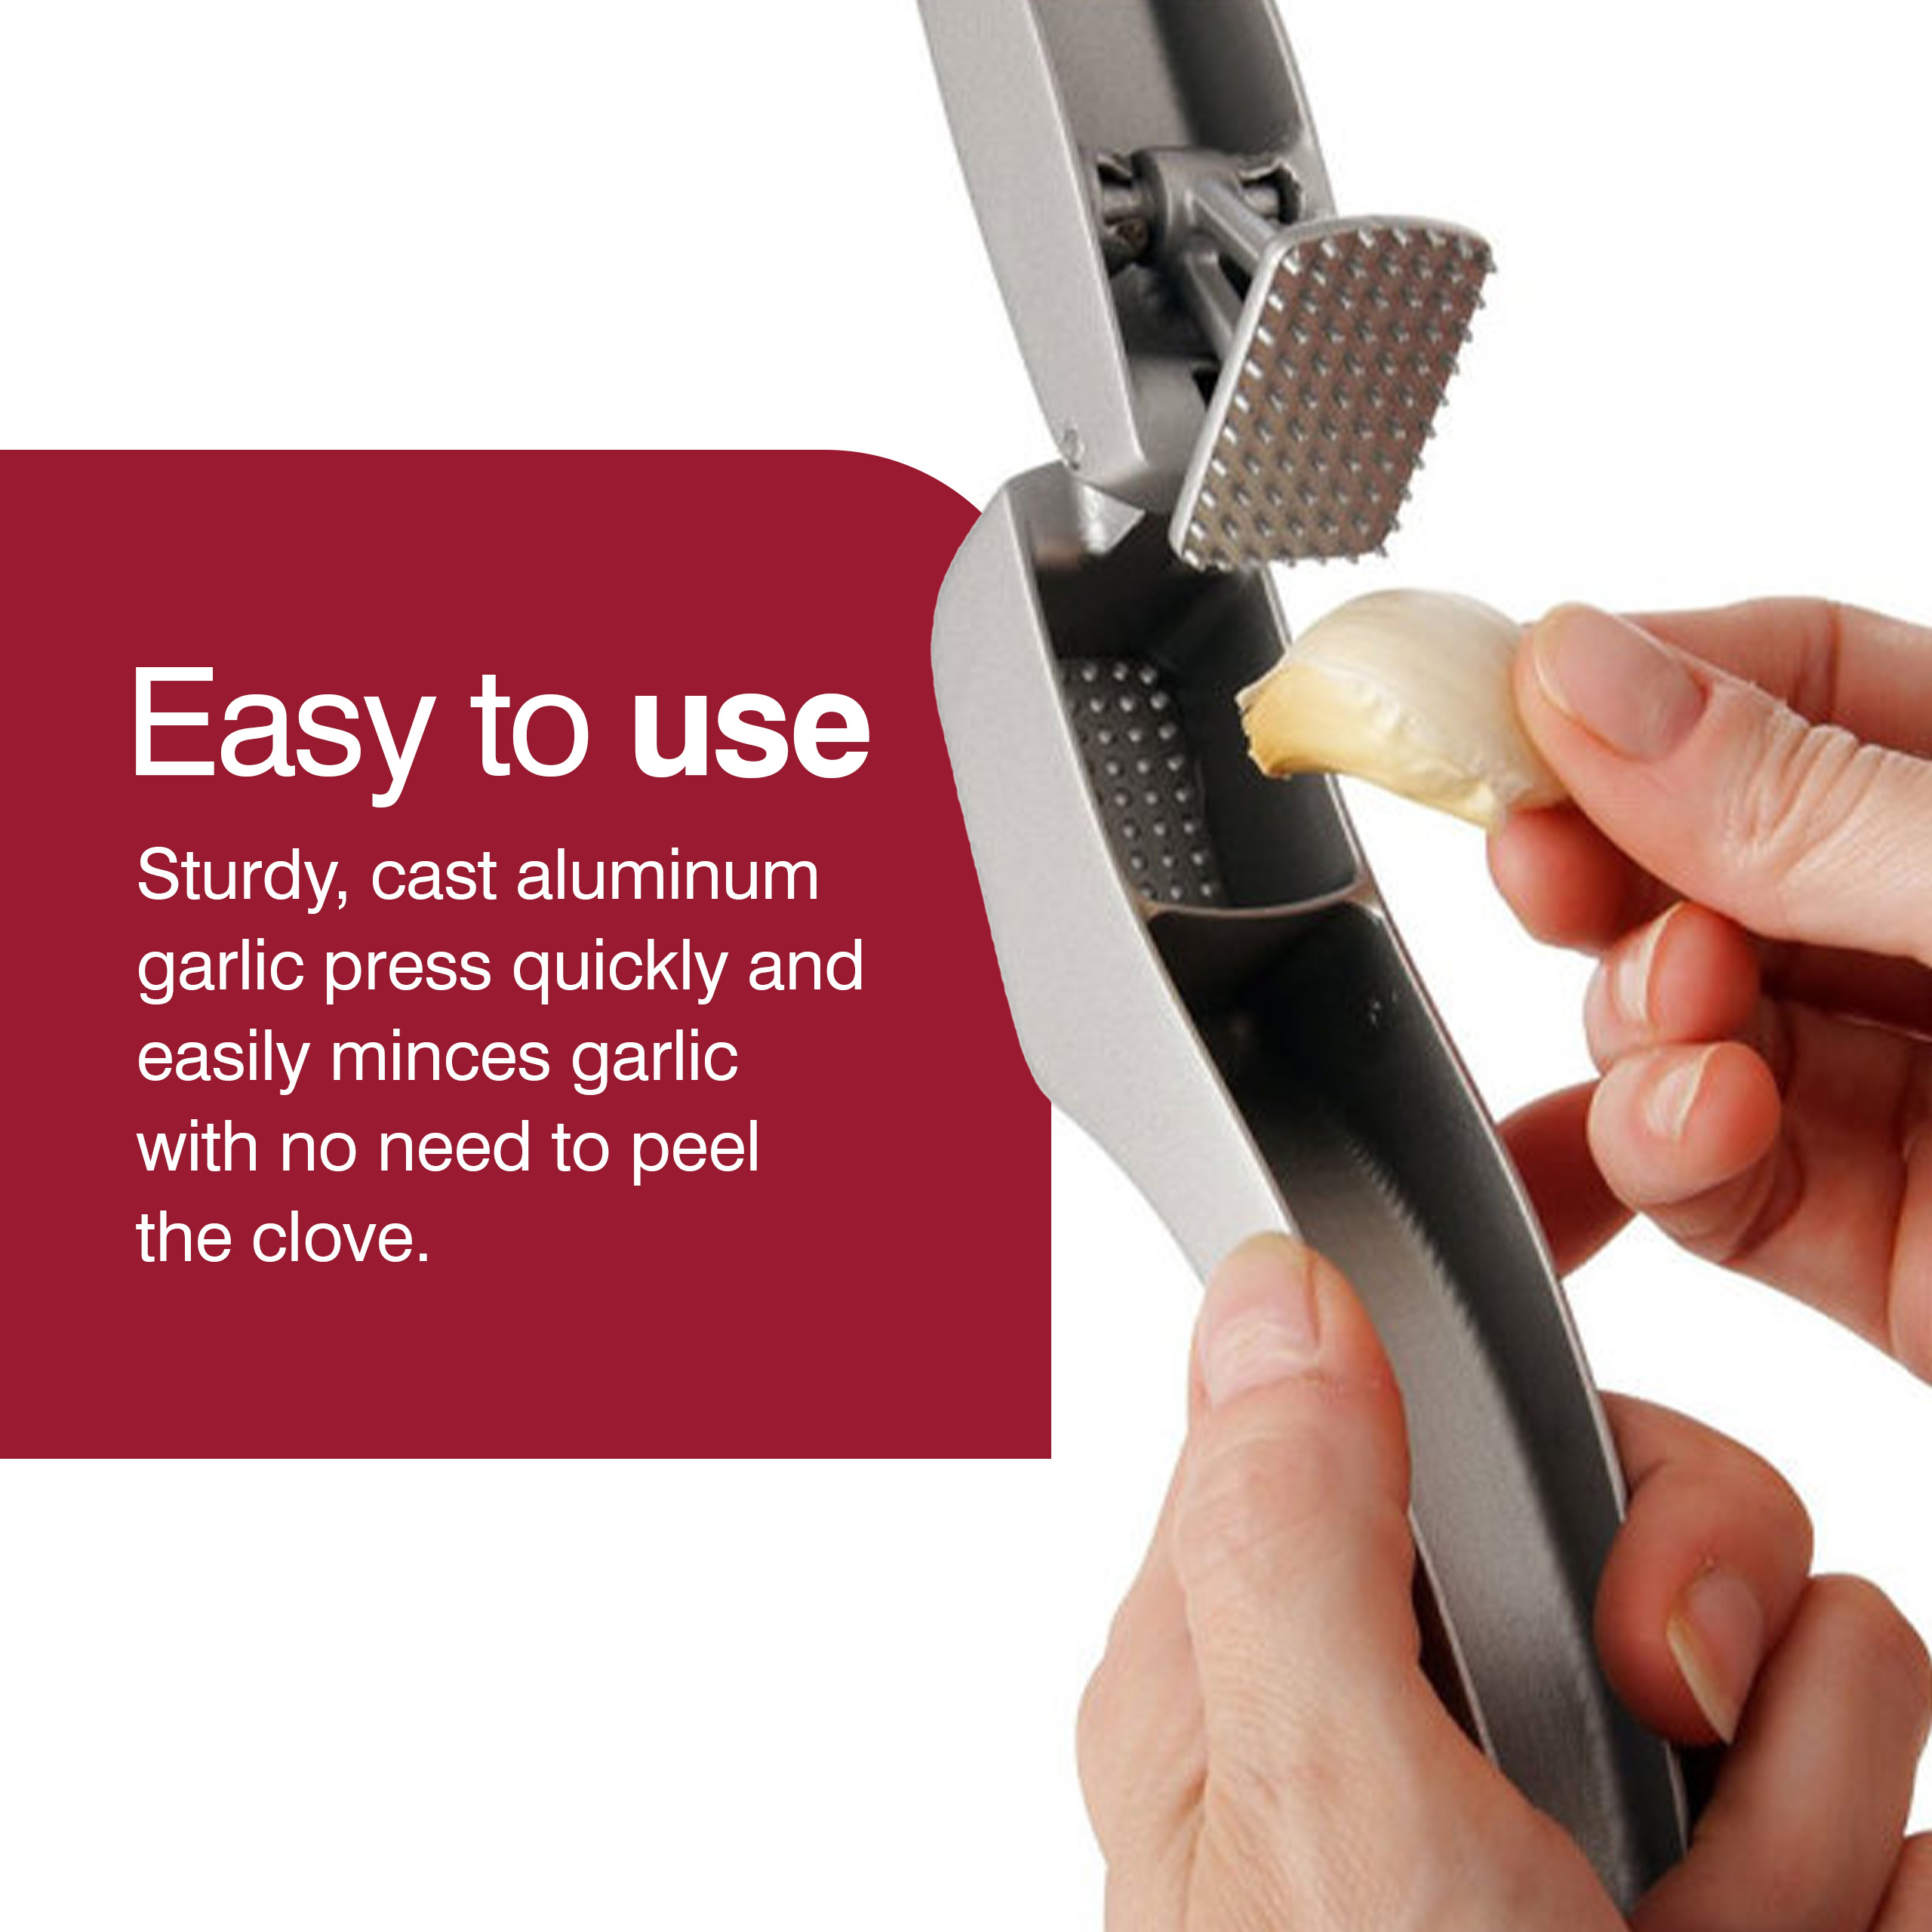 Zyliss Susi 3 Garlic Press Built in Cleaner - Crush, Mince and Peeler, Silver Aluminum Dishwasher Safe - image 4 of 7